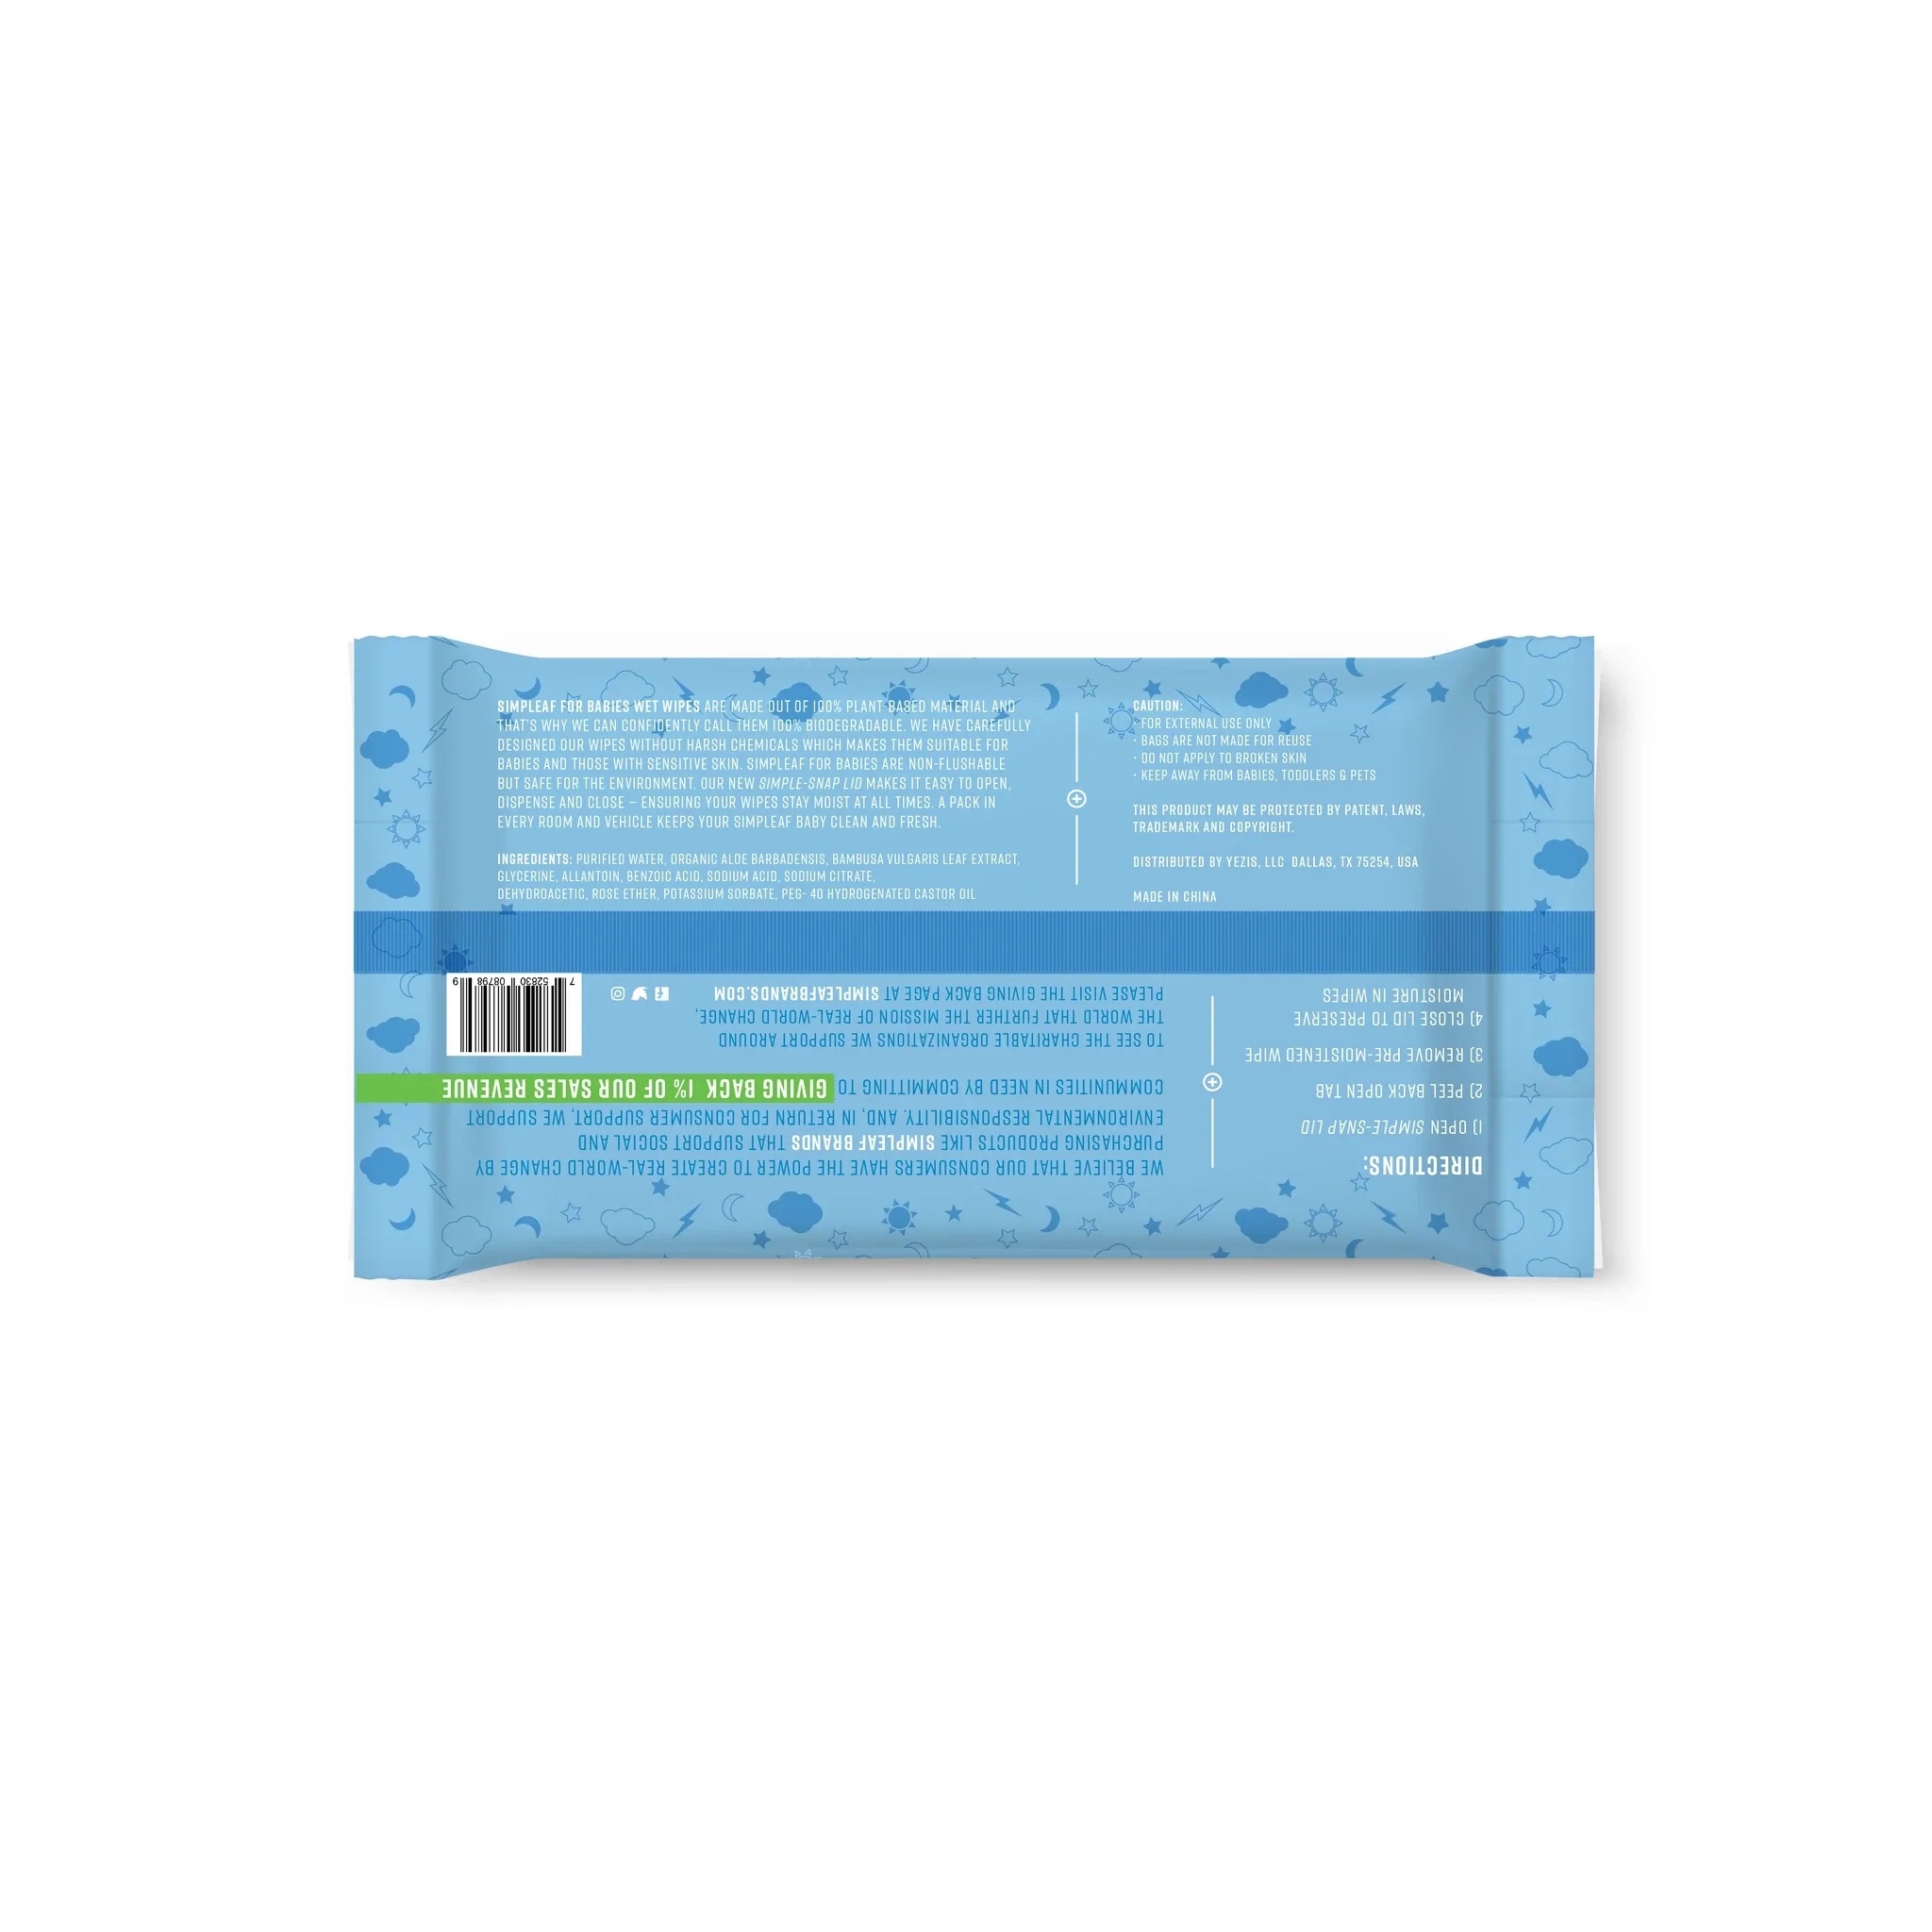 Simpleaf Unscented Baby Wipes Black-Owned